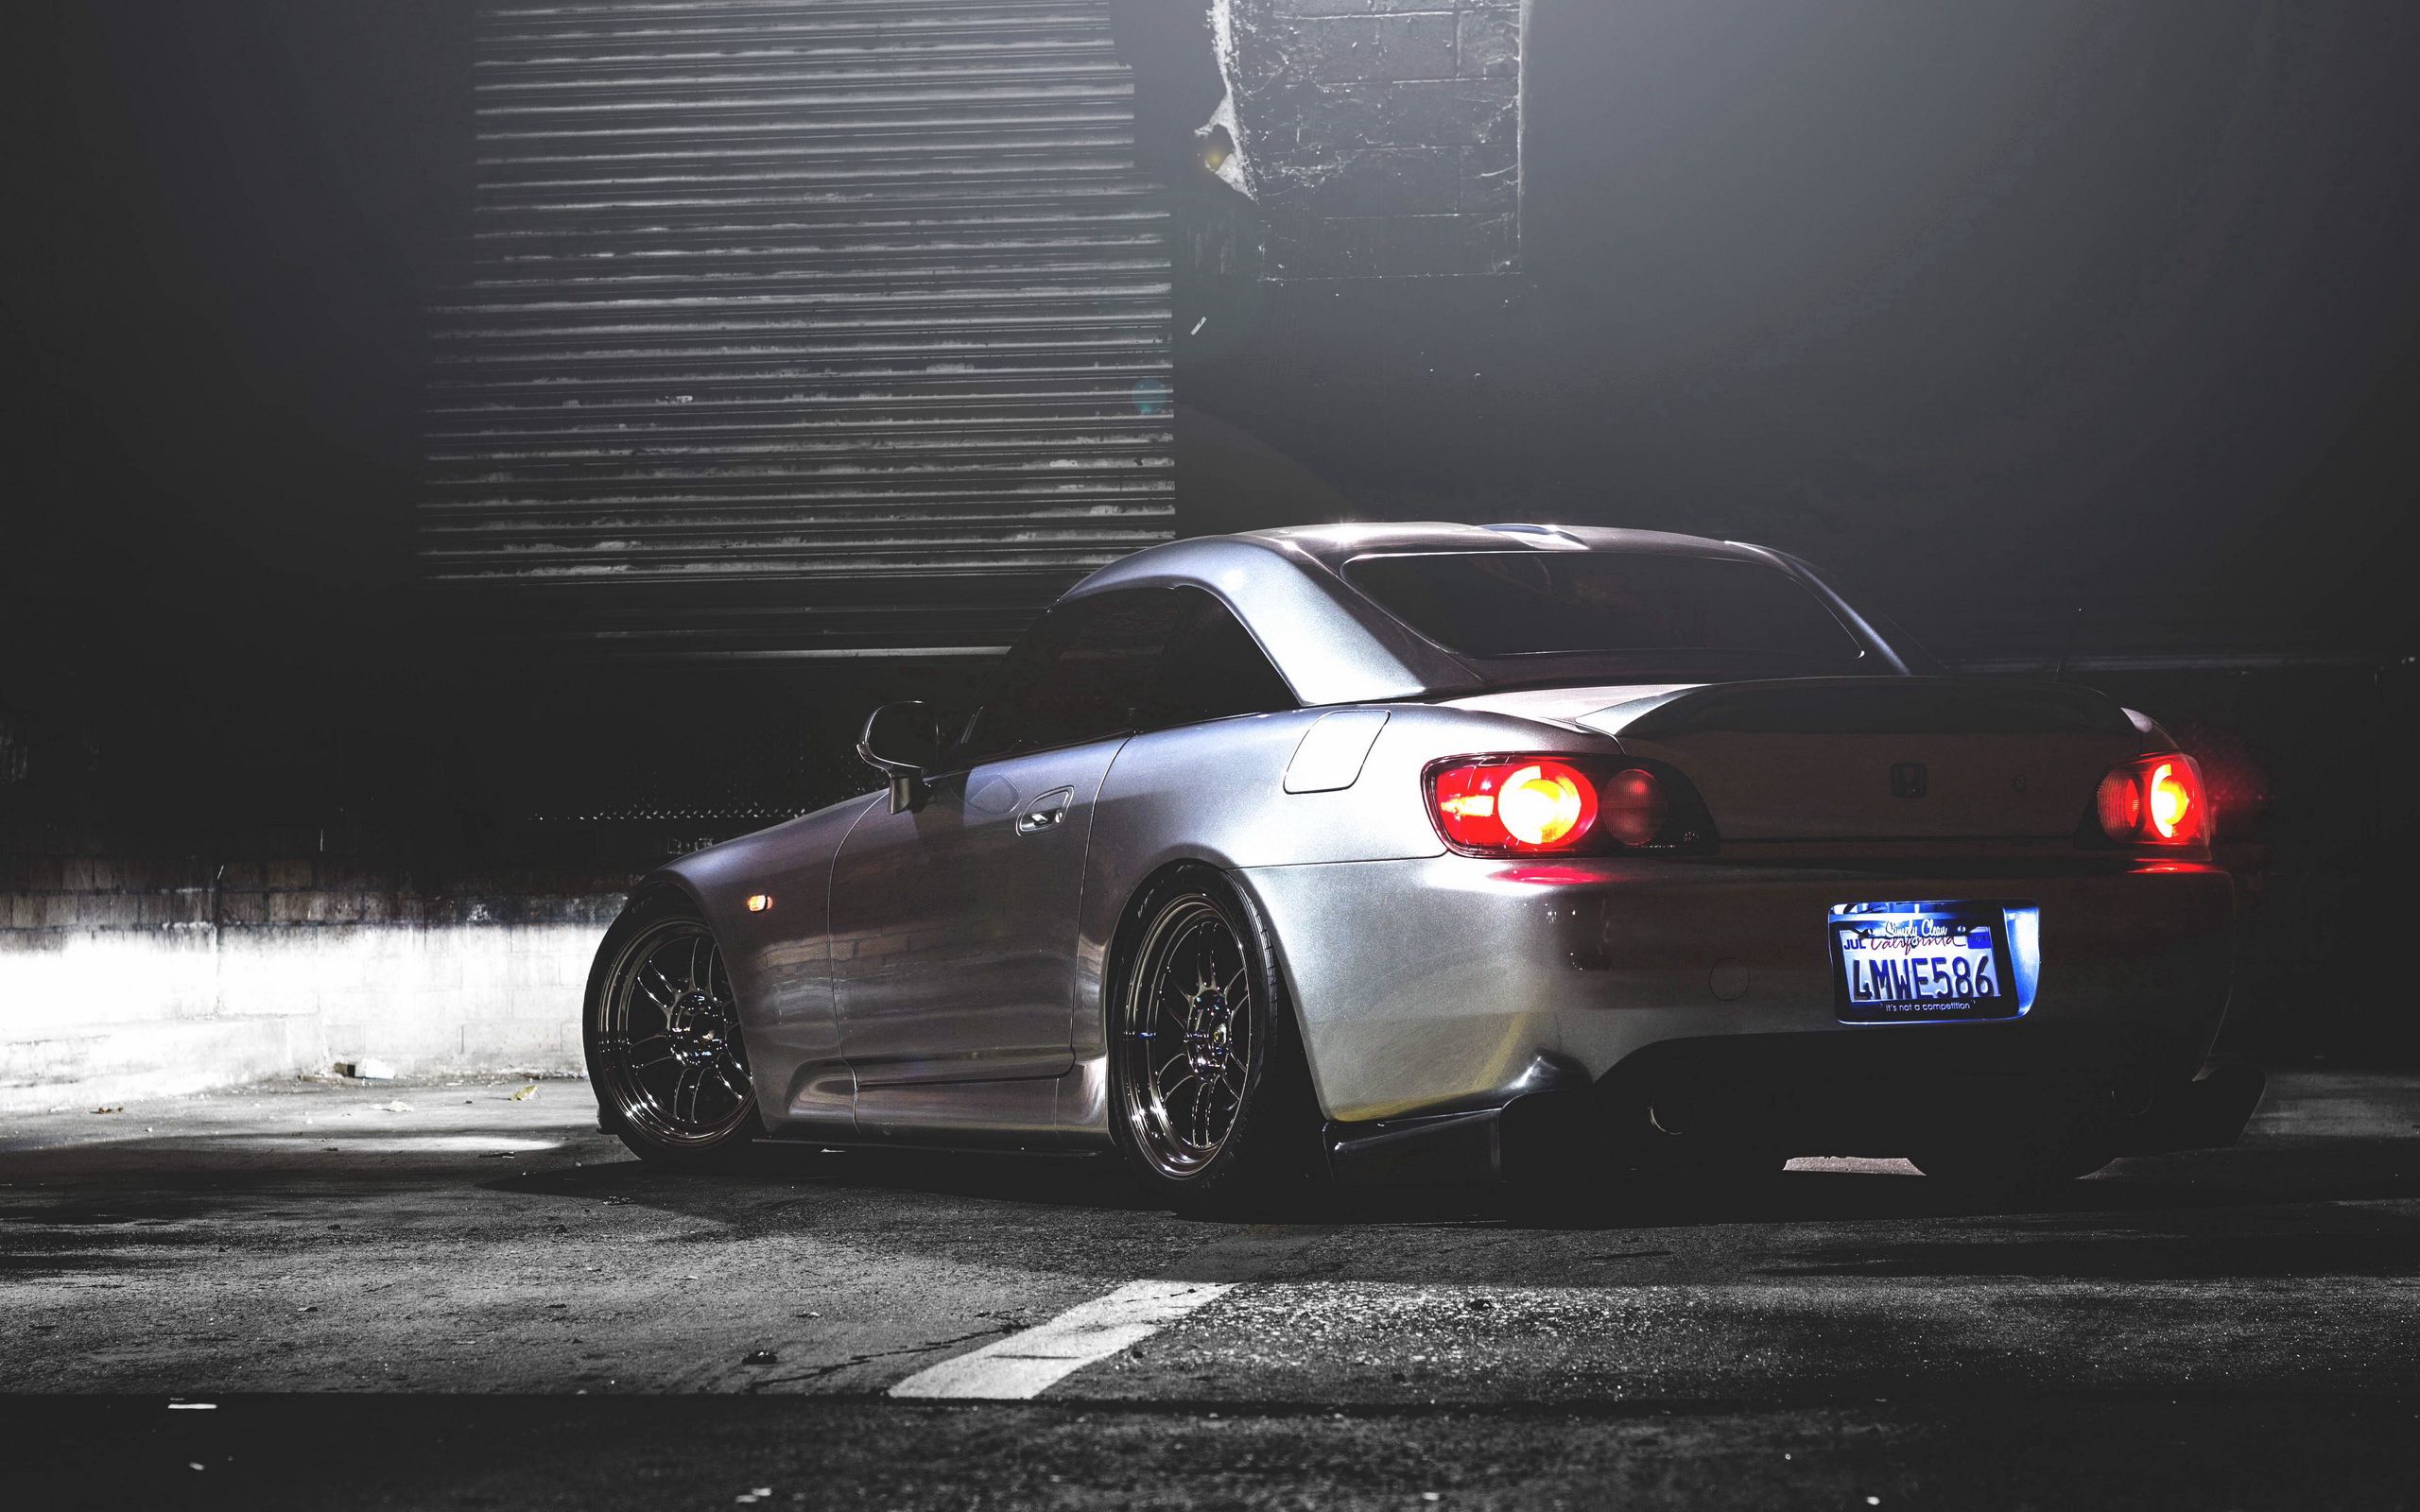 109928 download wallpaper honda, night, cars, back view, rear view, honda s2000 screensavers and pictures for free